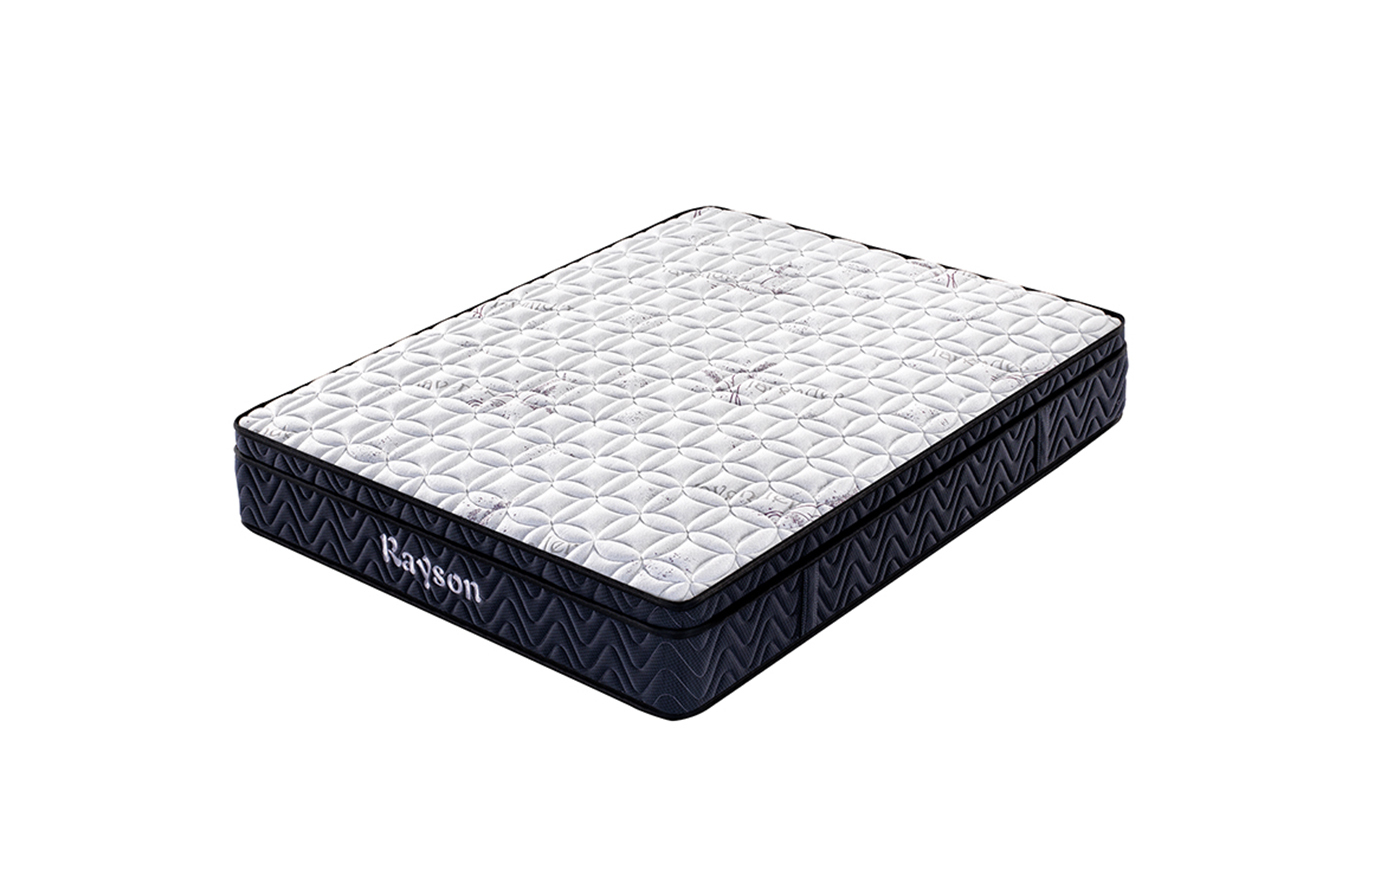 top rated hotel mattresses 31cm luxury hotel quality mattress customized company